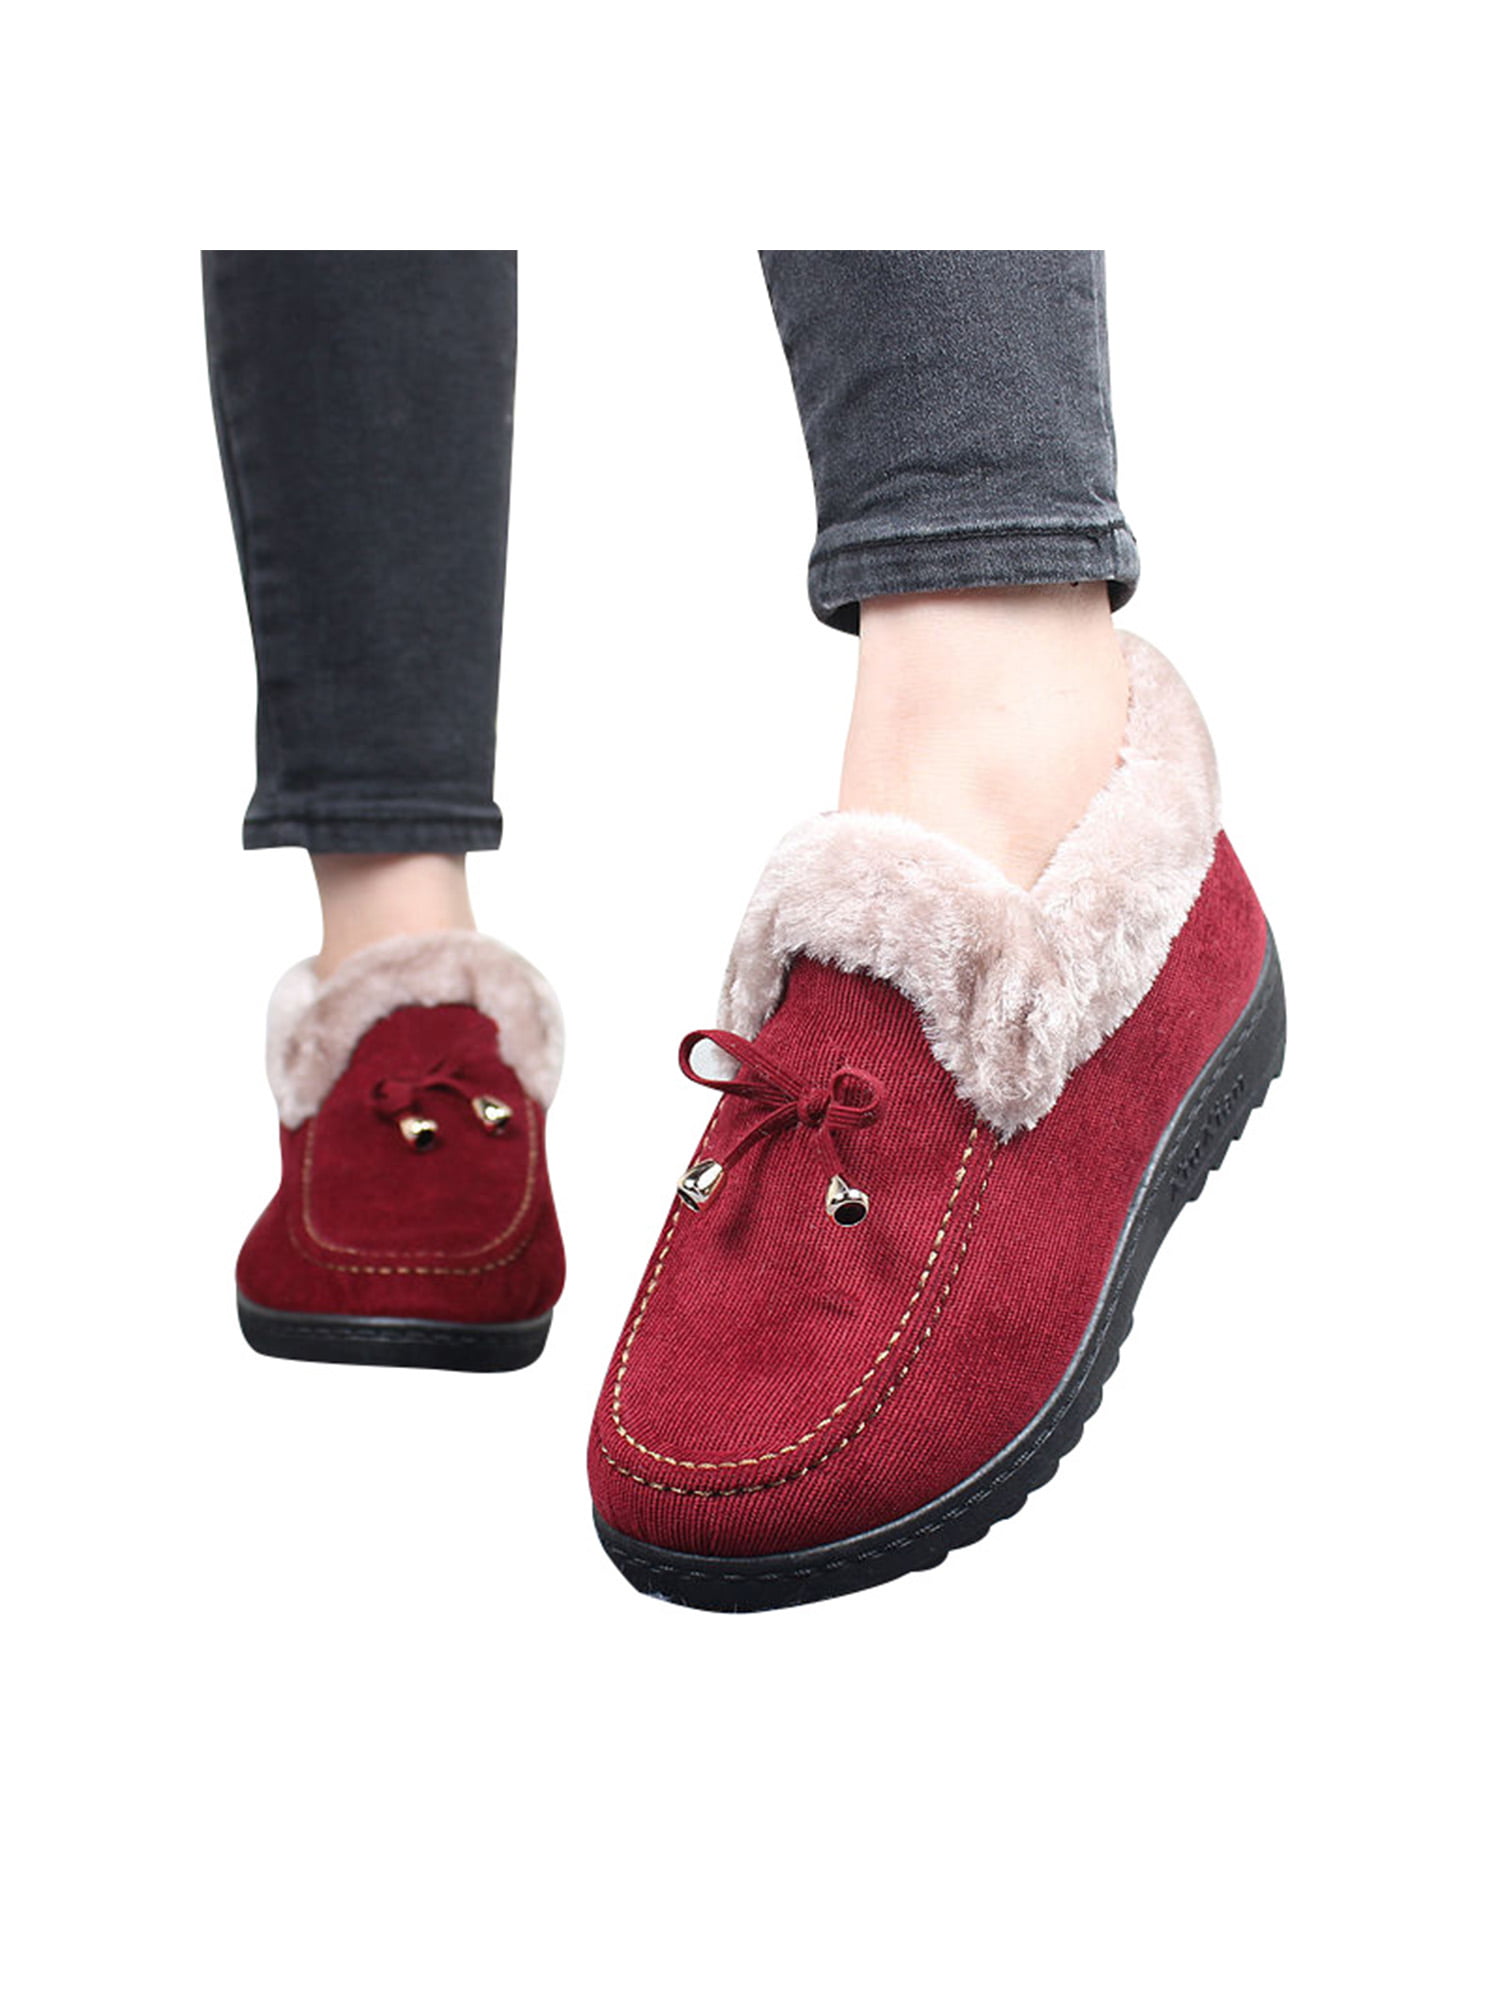 Winter Women Faux Fur Memory Foam Slippers Luxe Slip On House Bedroom Indoor/Outdoor Shoes Red Color : Red, Size : 38-39 36-37 